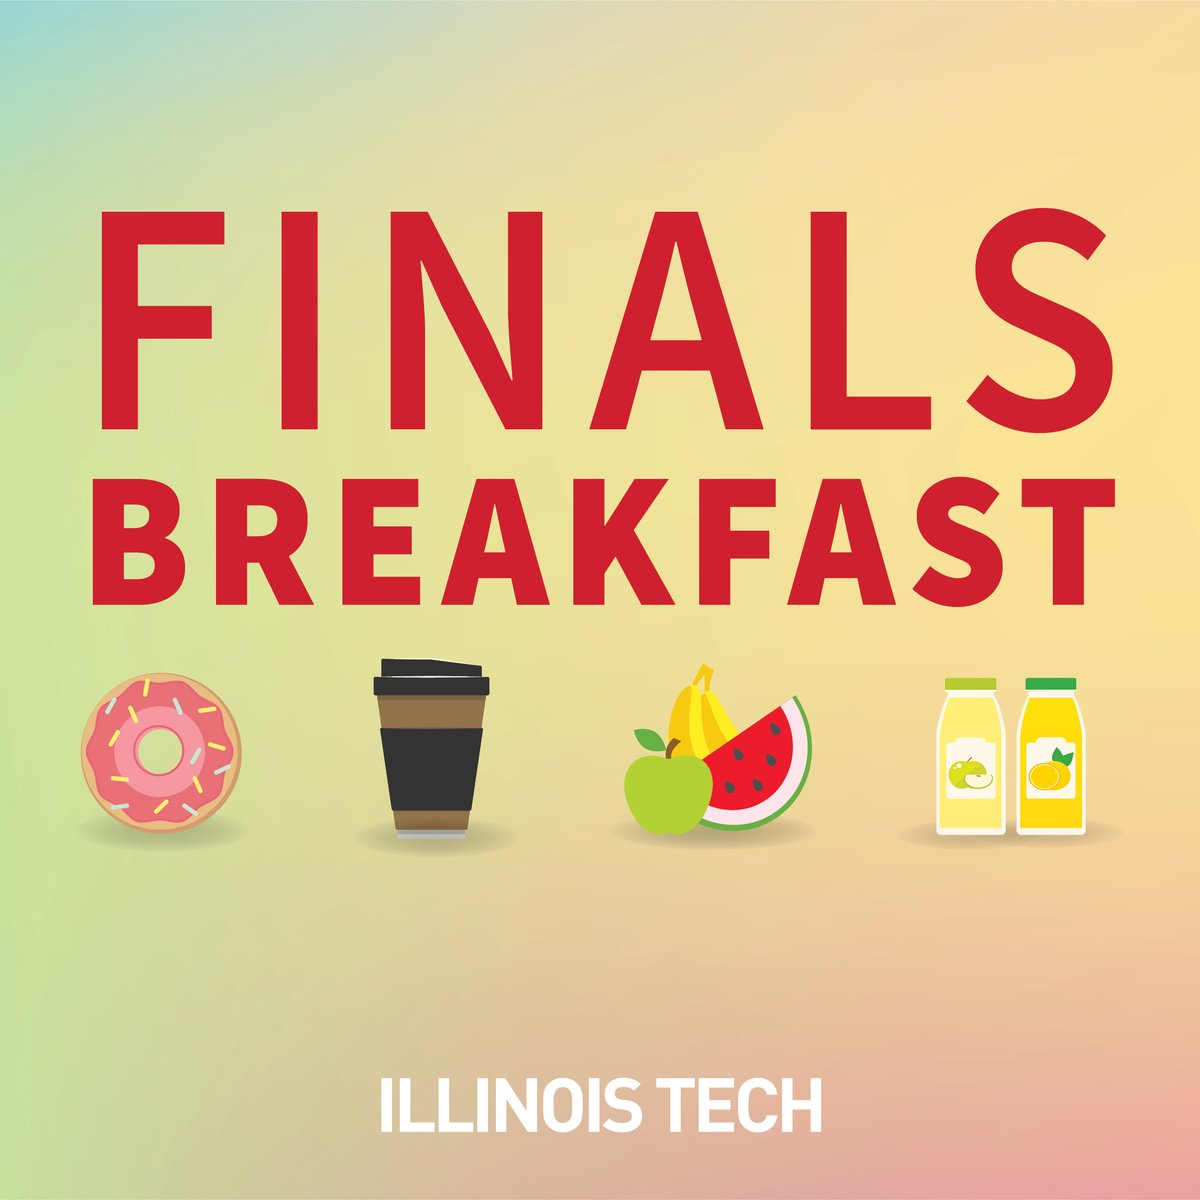 👋🏼 Scarlet Hawks! 📚 Kick off your day the right way with free breakfast on Monday, April 29, from 7:30-10:30 a.m. Enjoy donuts, fruit, coffee, and juice at various locations across Mies Campus—check out our IG Story for all the details. Let's conquer those exams! #FinalsWeek